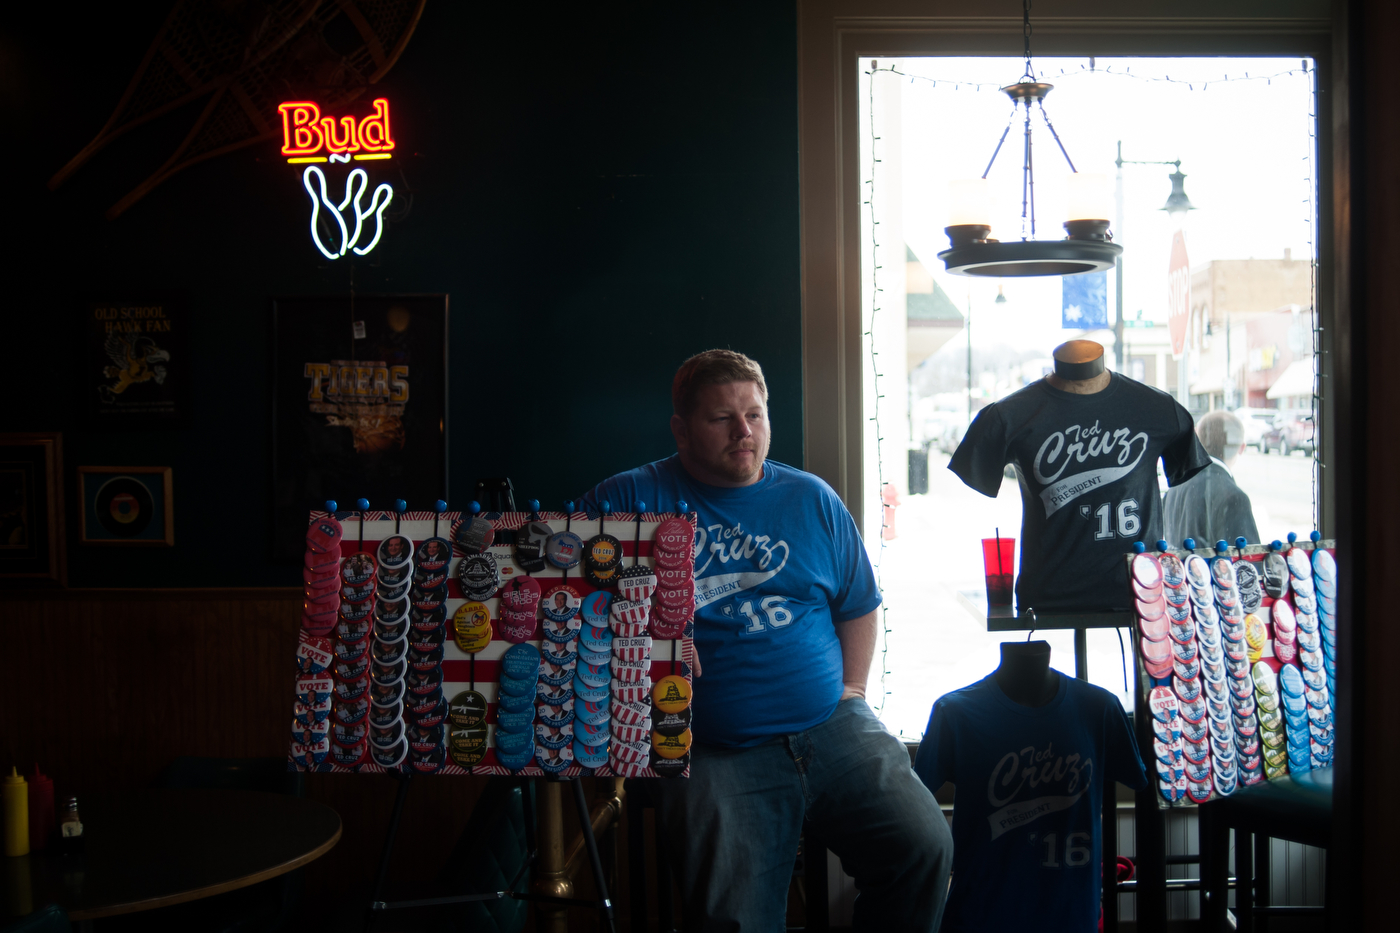  Michael Goodart sells campaign memorabilia ahead of Republican U.S. presidential candidate Ted Cruz' campaign stop at Prime Time Restaurant in Guthrie Center, Iowa on January 4, 2016.  